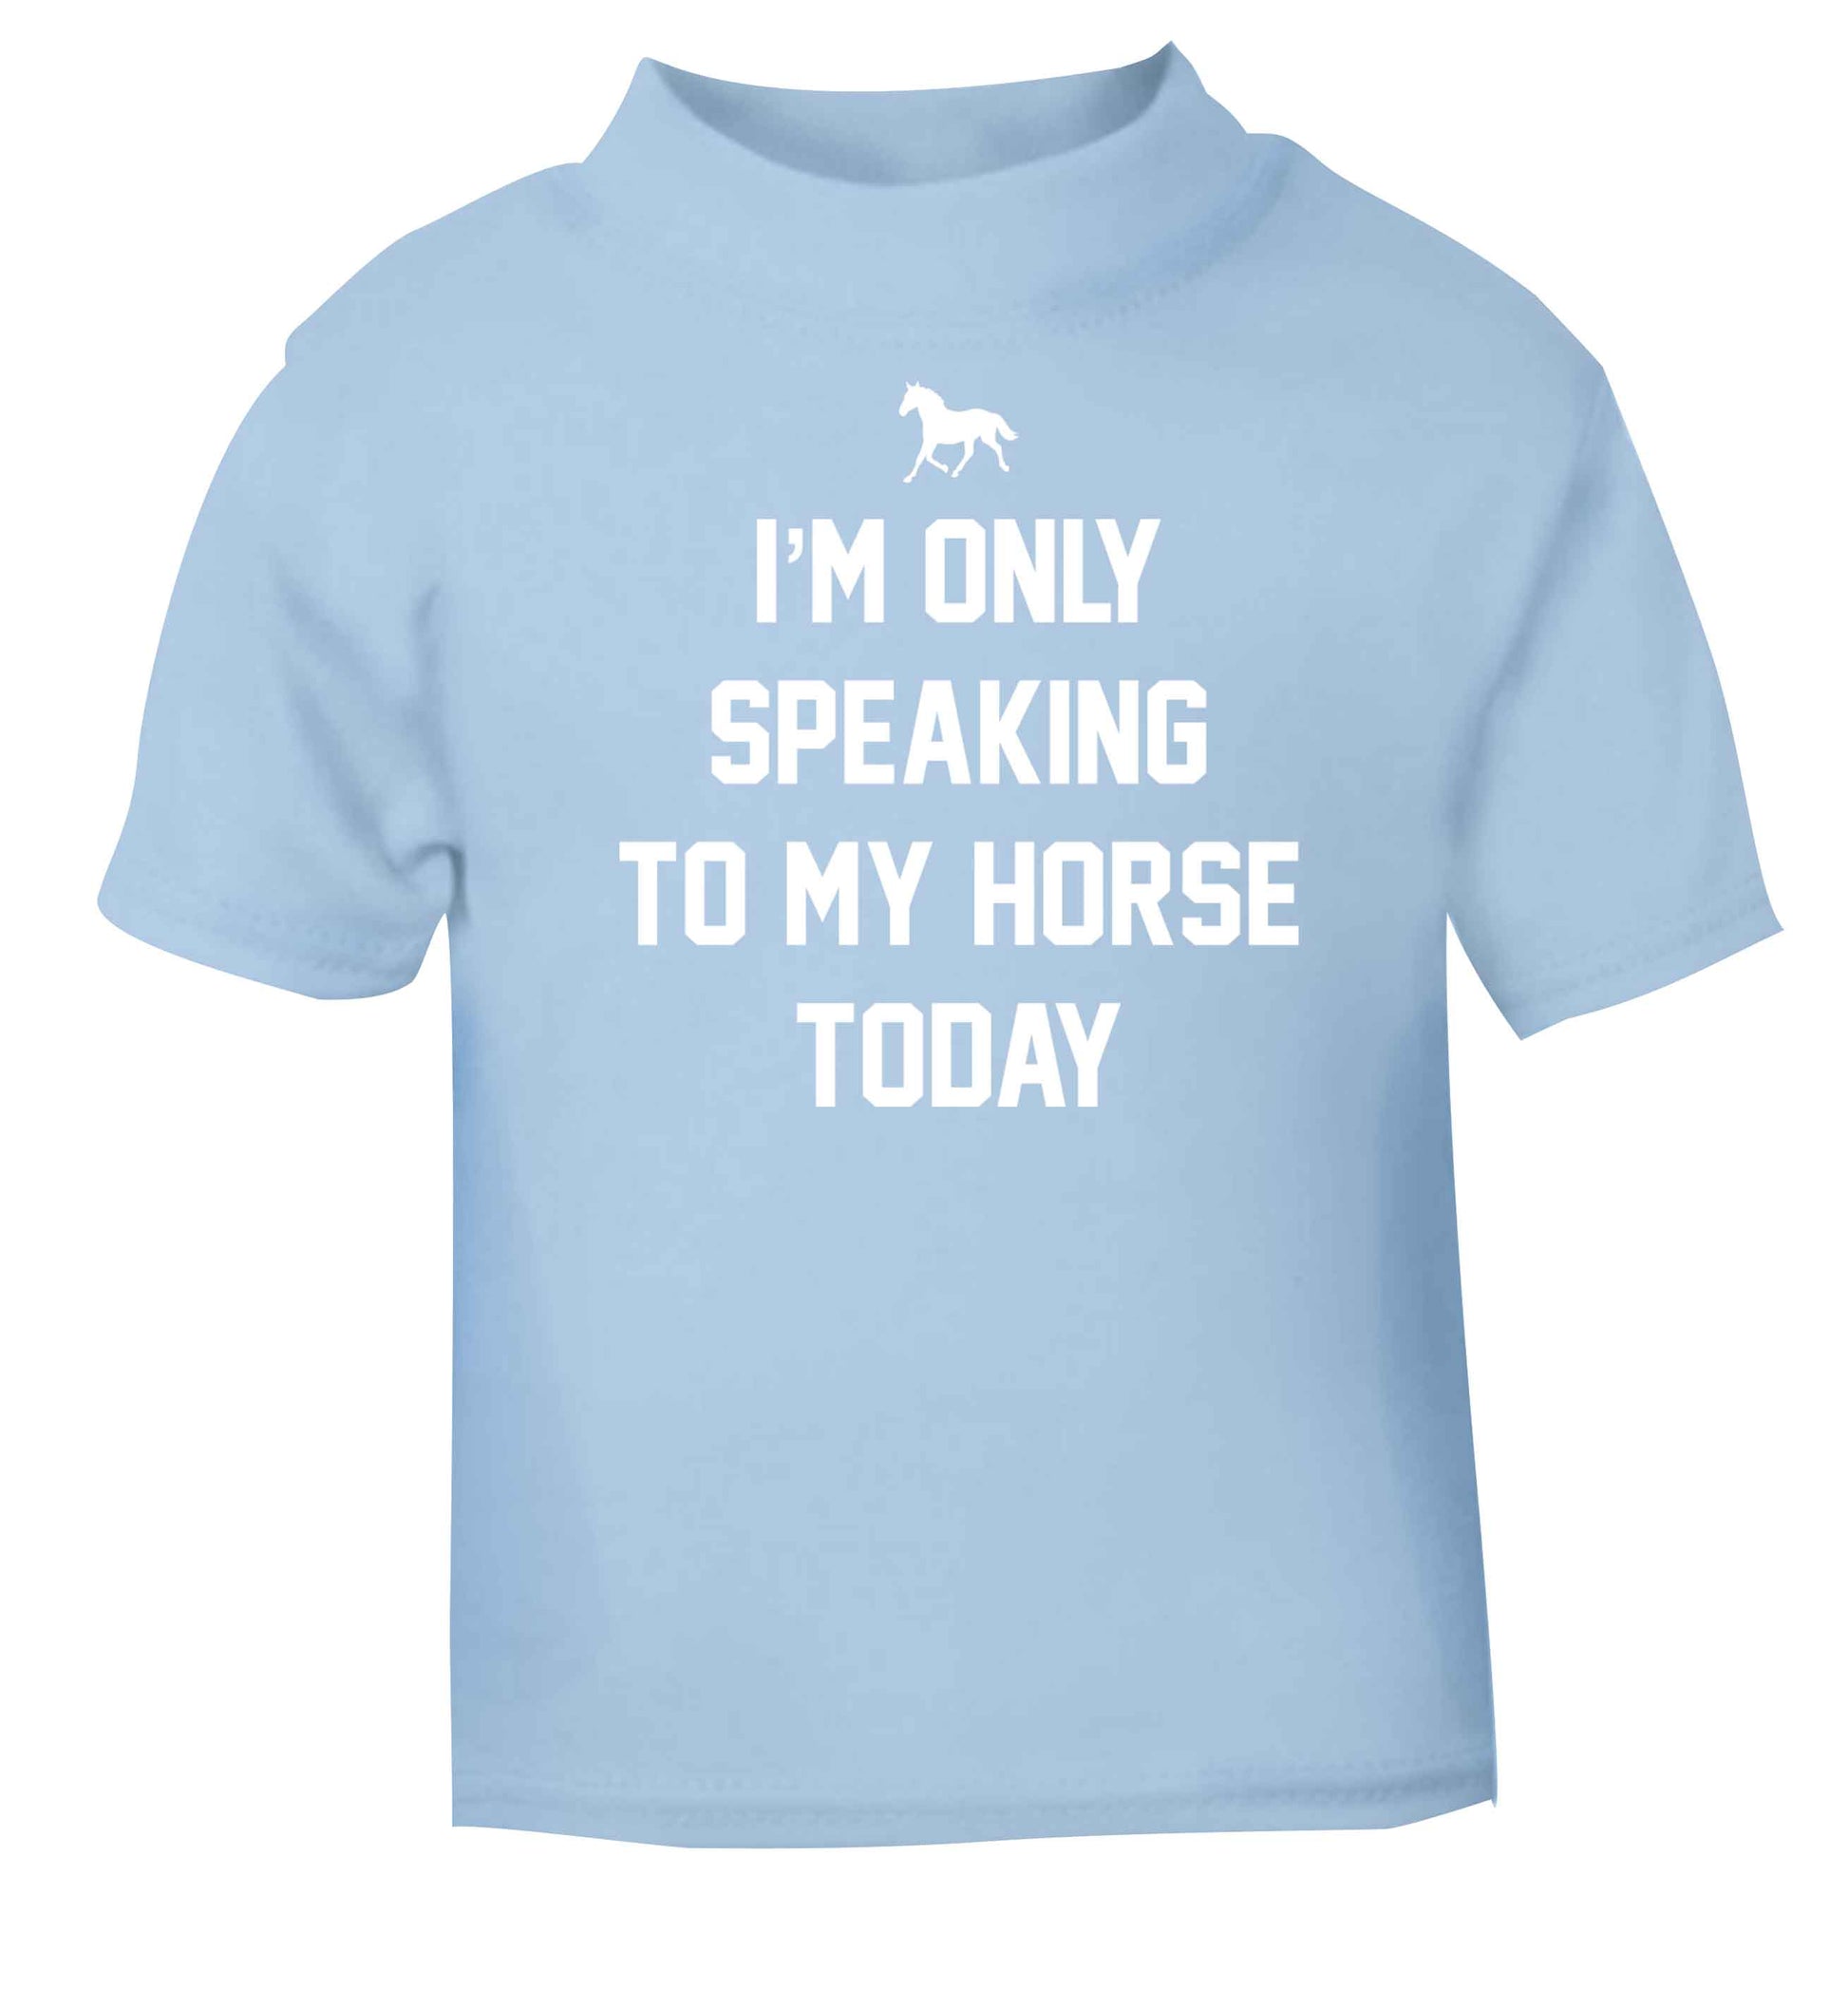 I'm only speaking to my horse today light blue baby toddler Tshirt 2 Years